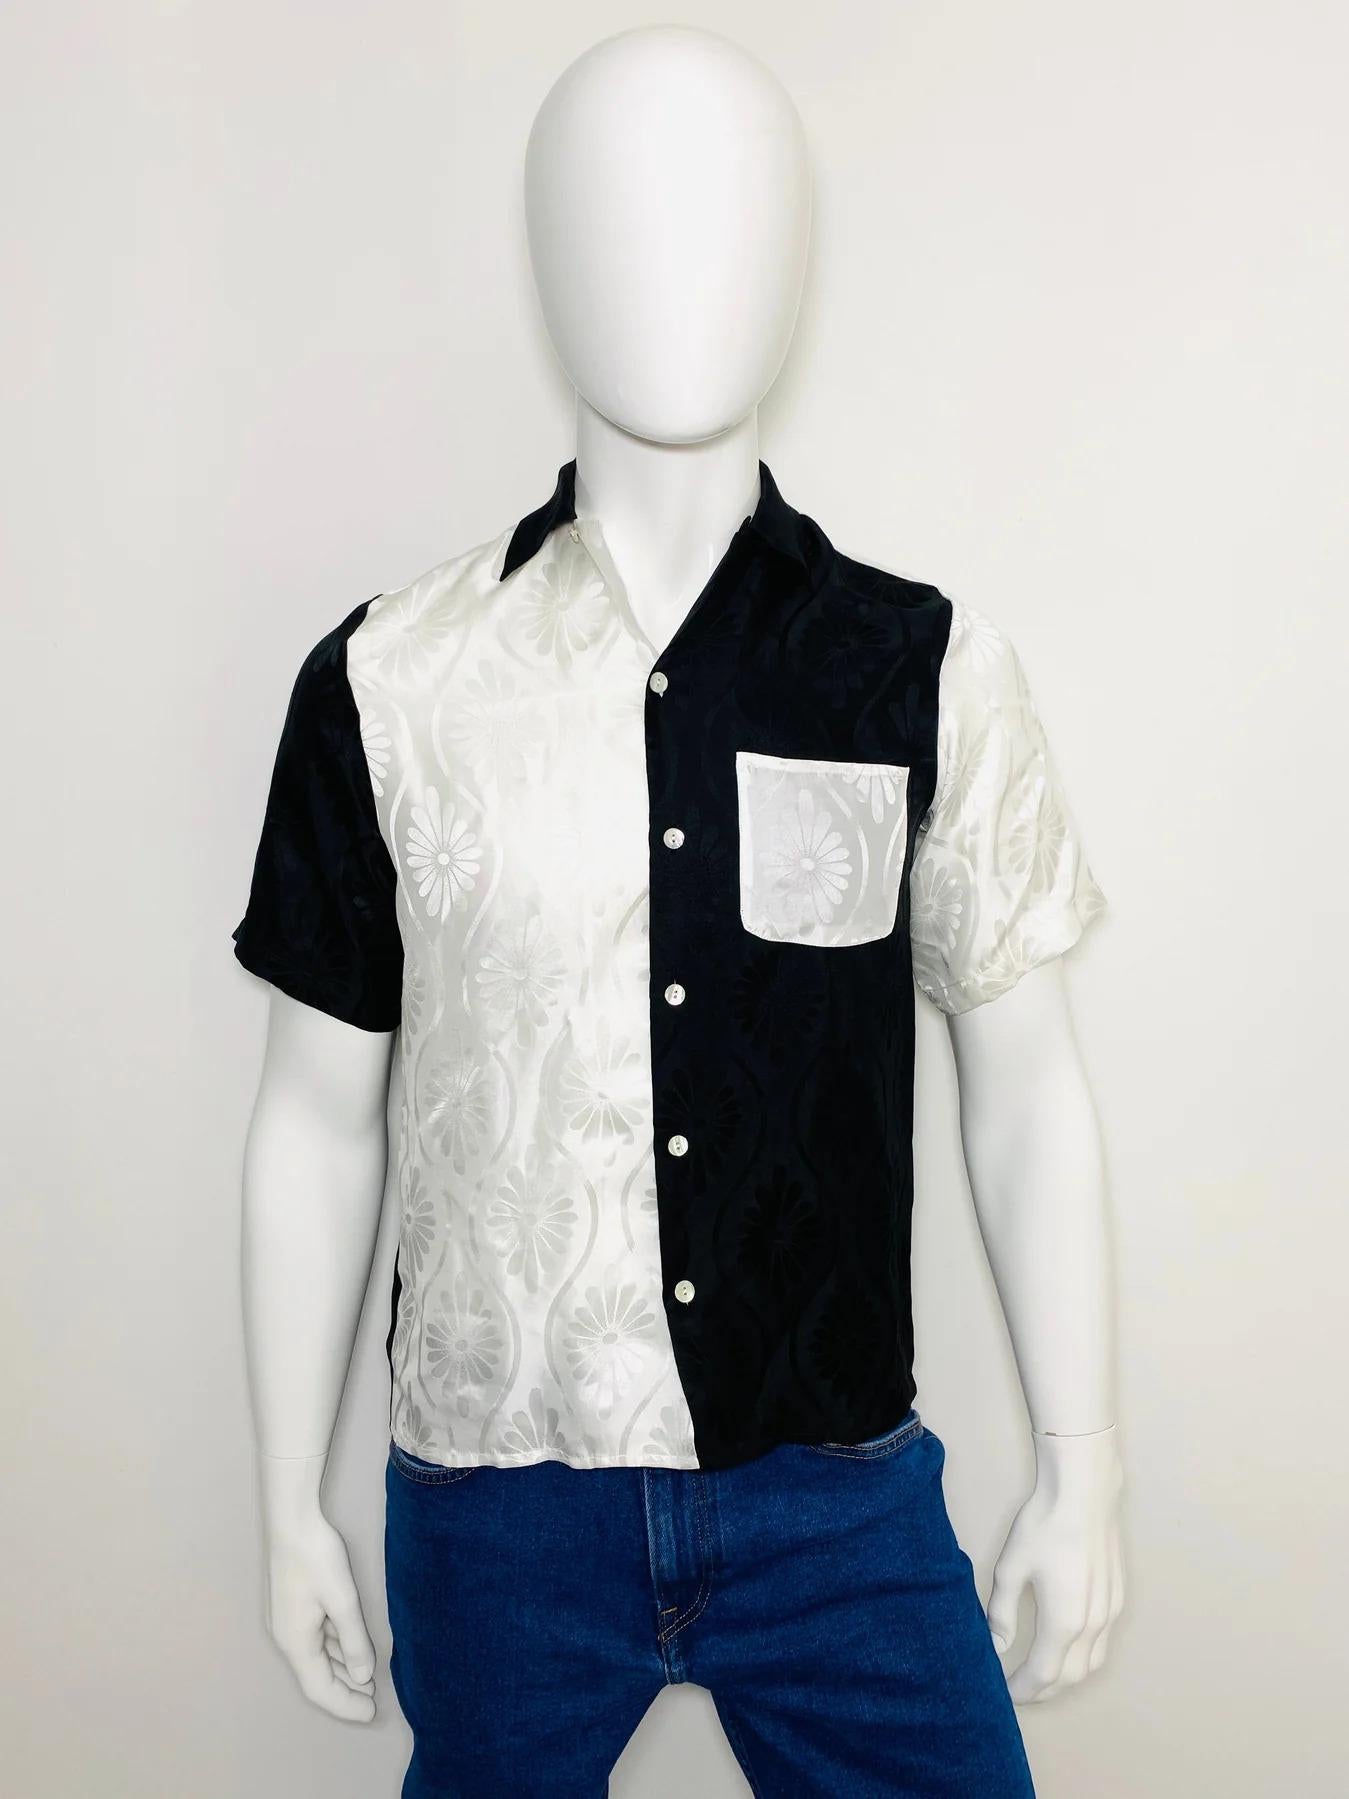 Nipoaloha Aloha Silk Jacquard Shirt

Black and white flower pattern throughout. Buttons fastening to the front.

Additional information:
Size – S
Composition - Silk
Condition – Very Good